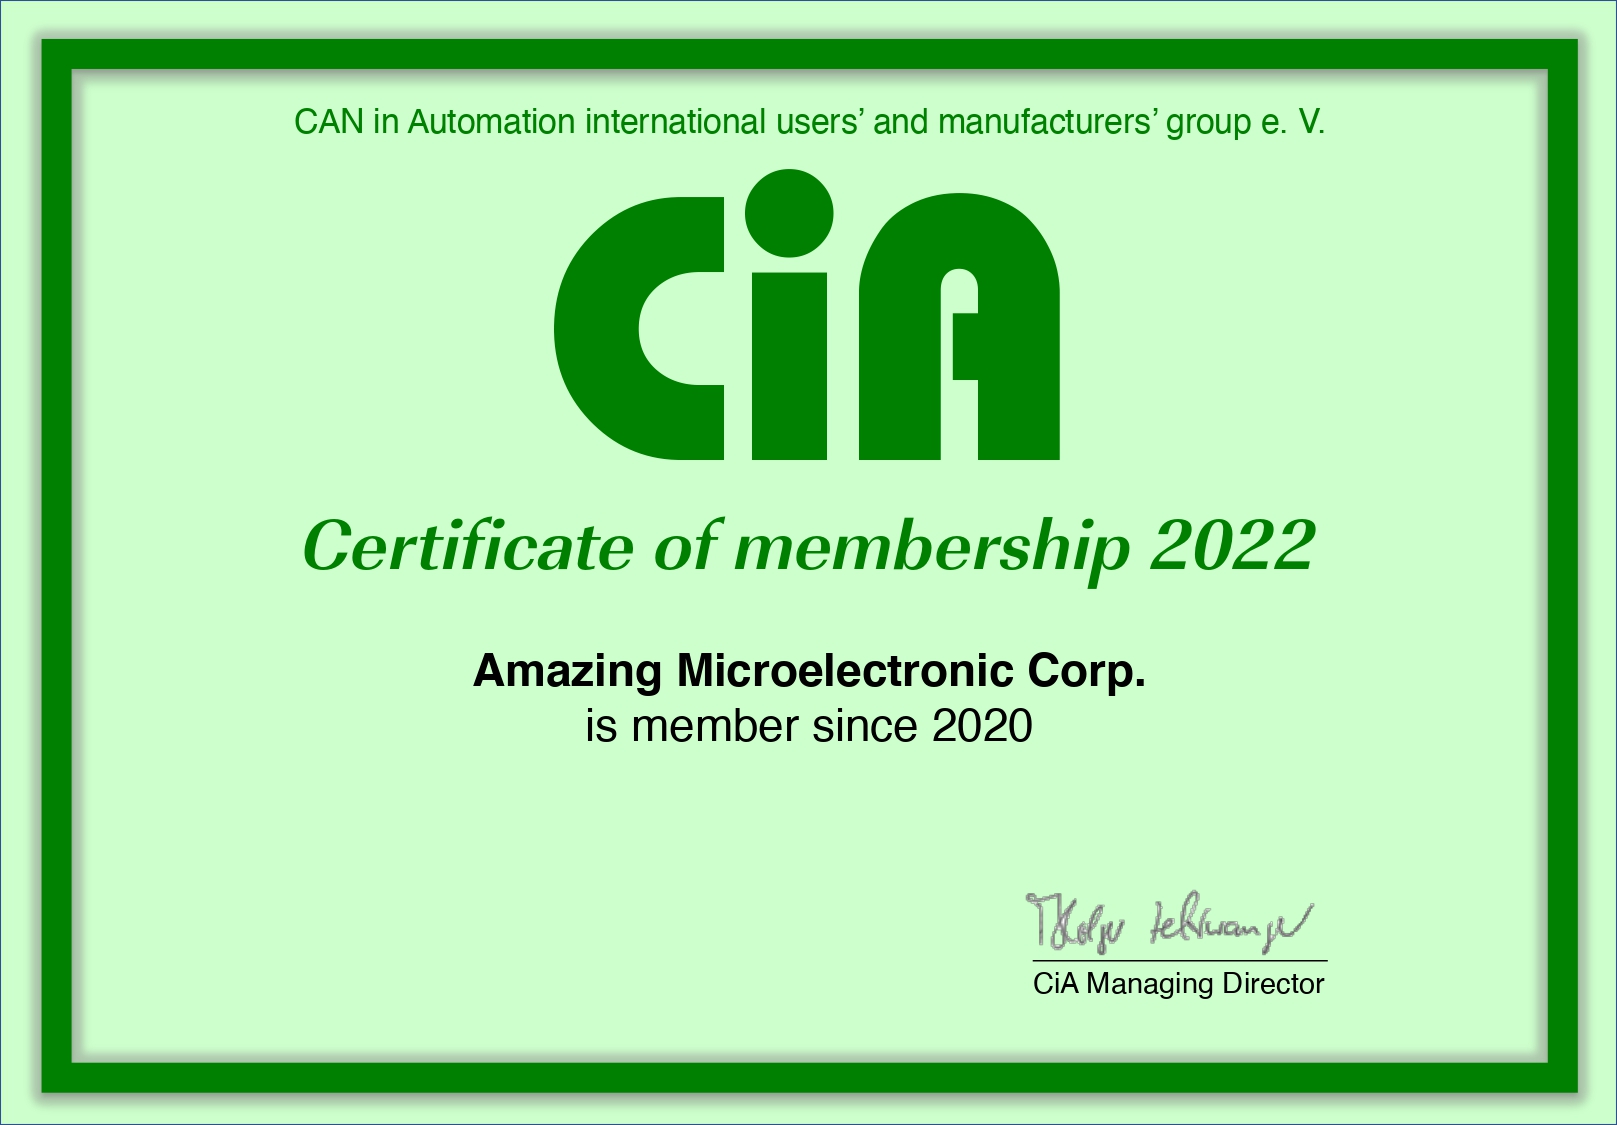 CAN in Automation (CiA)